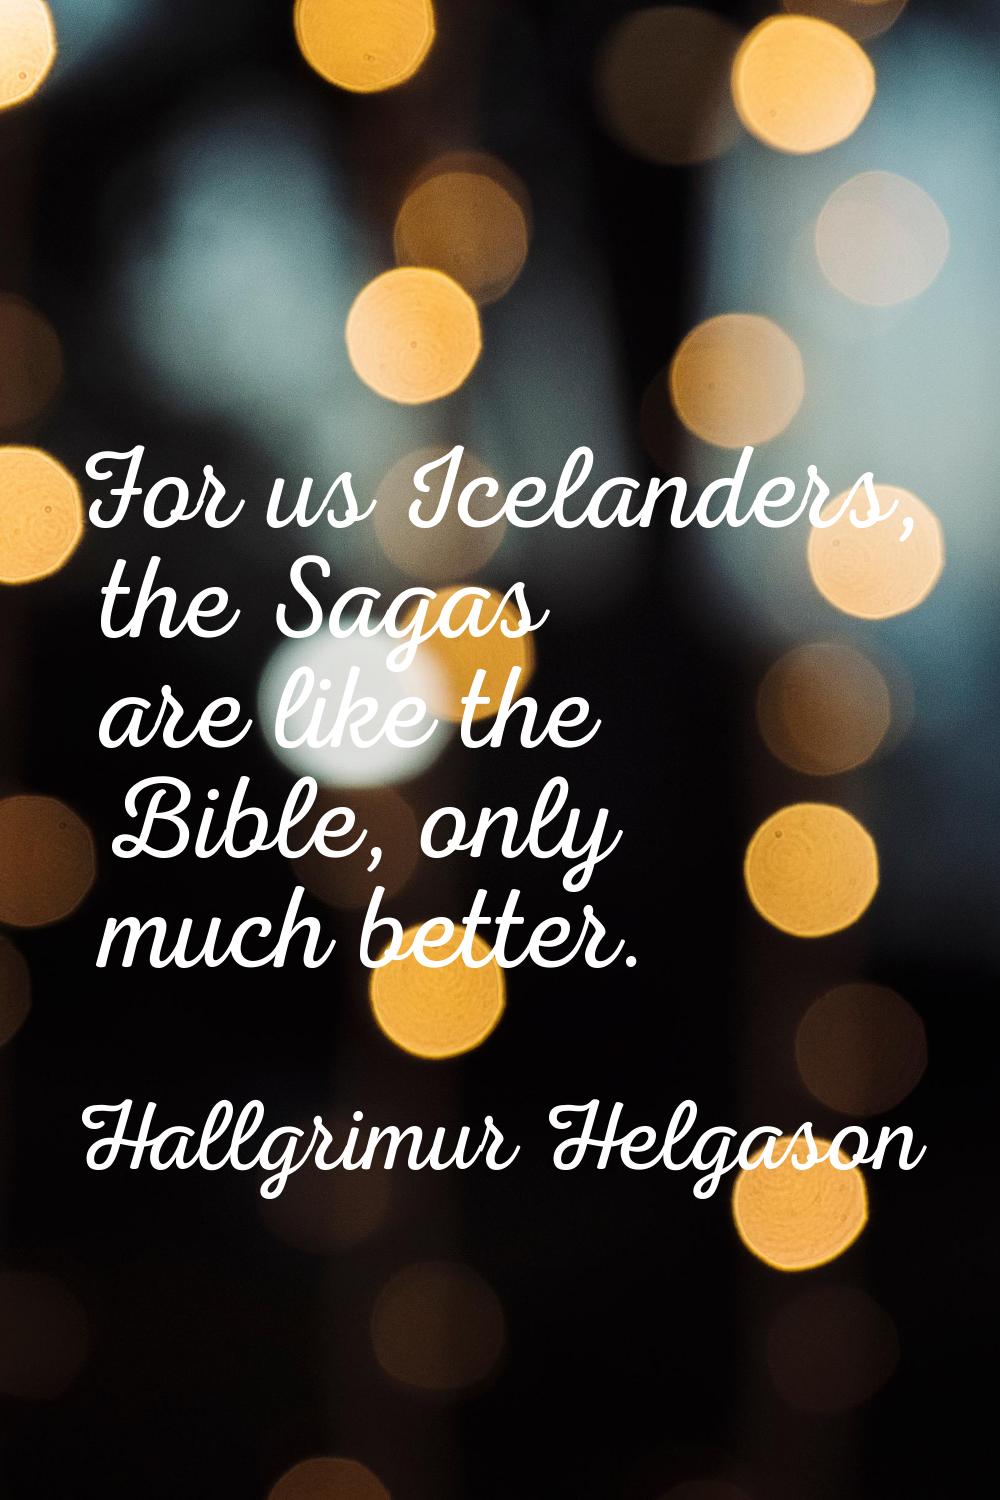 For us Icelanders, the Sagas are like the Bible, only much better.